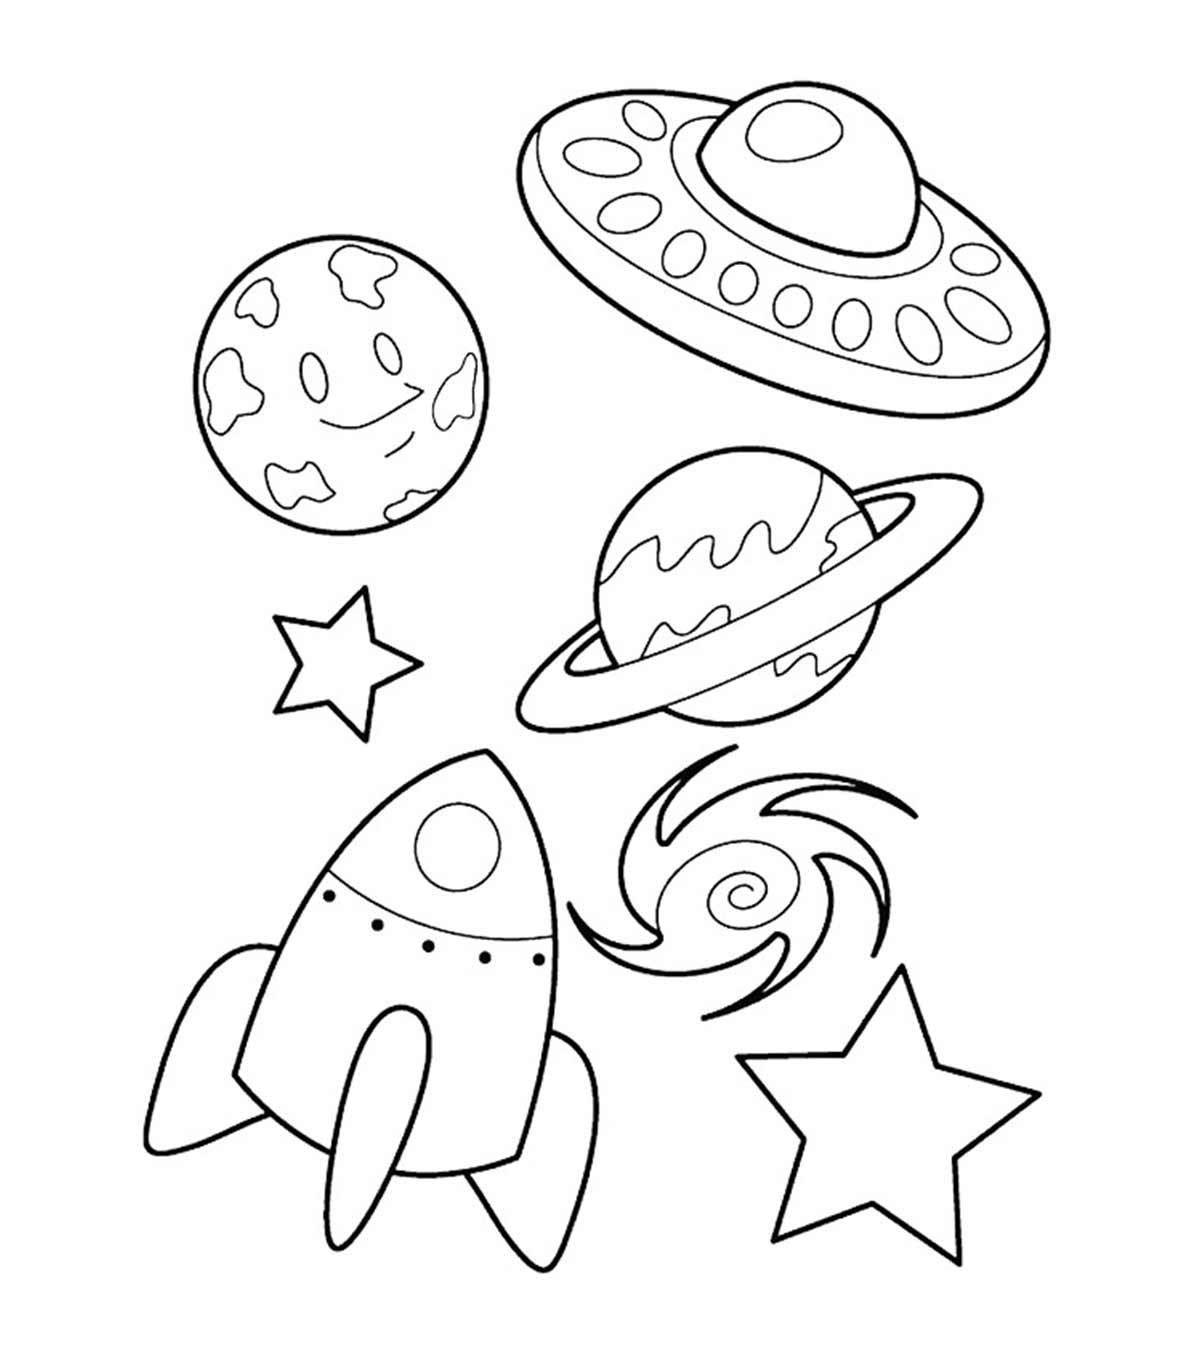 Fantastic space coloring book for 4-5 year olds